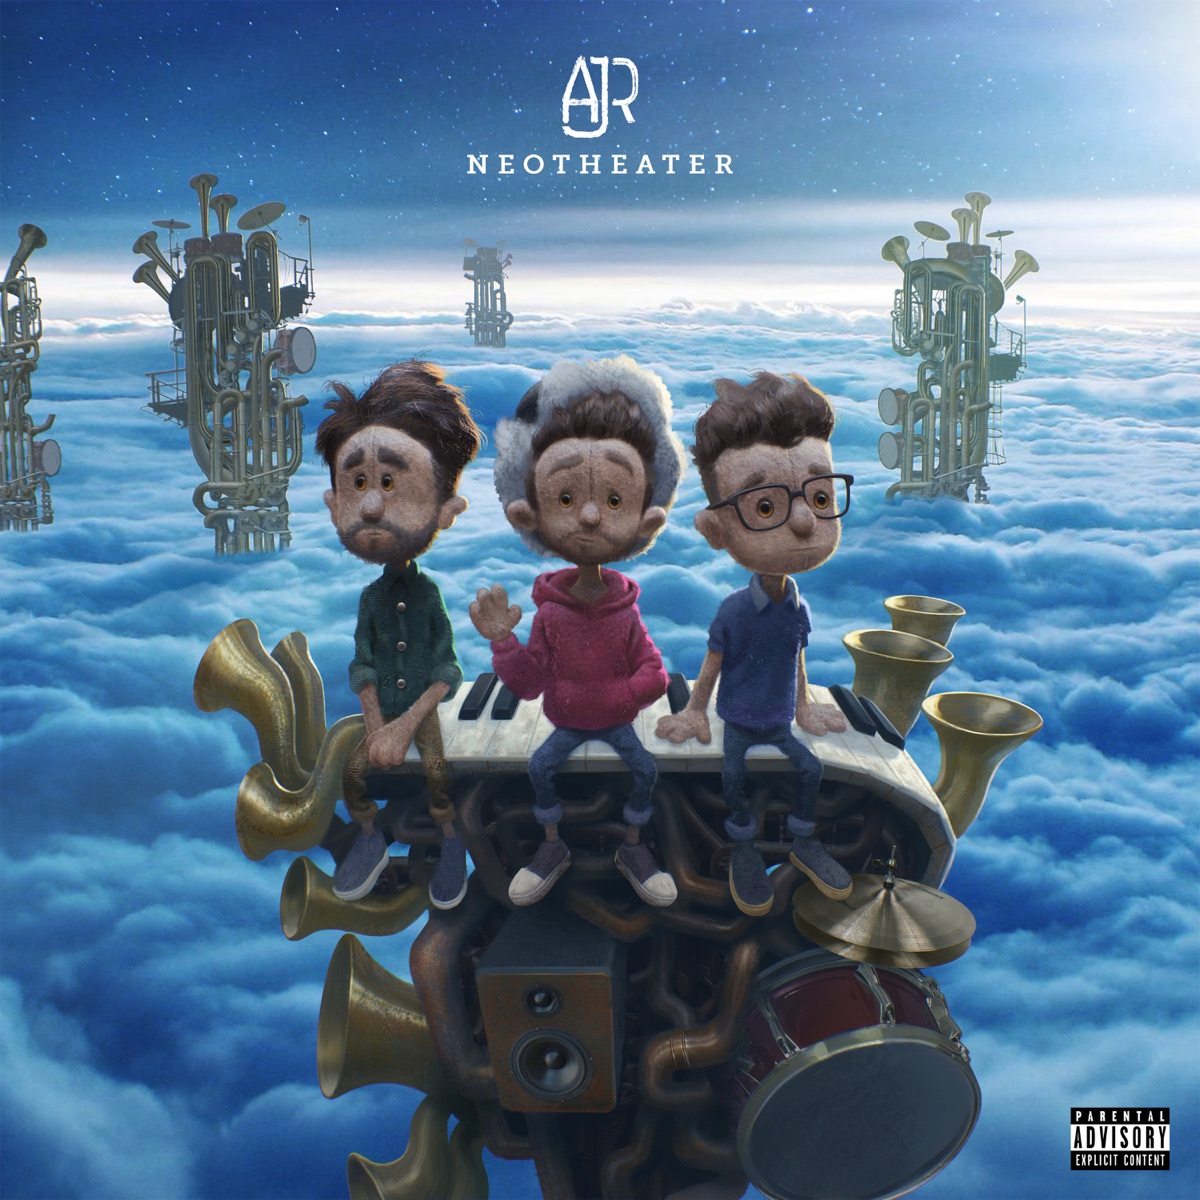 AJR Neotheater cover artwork